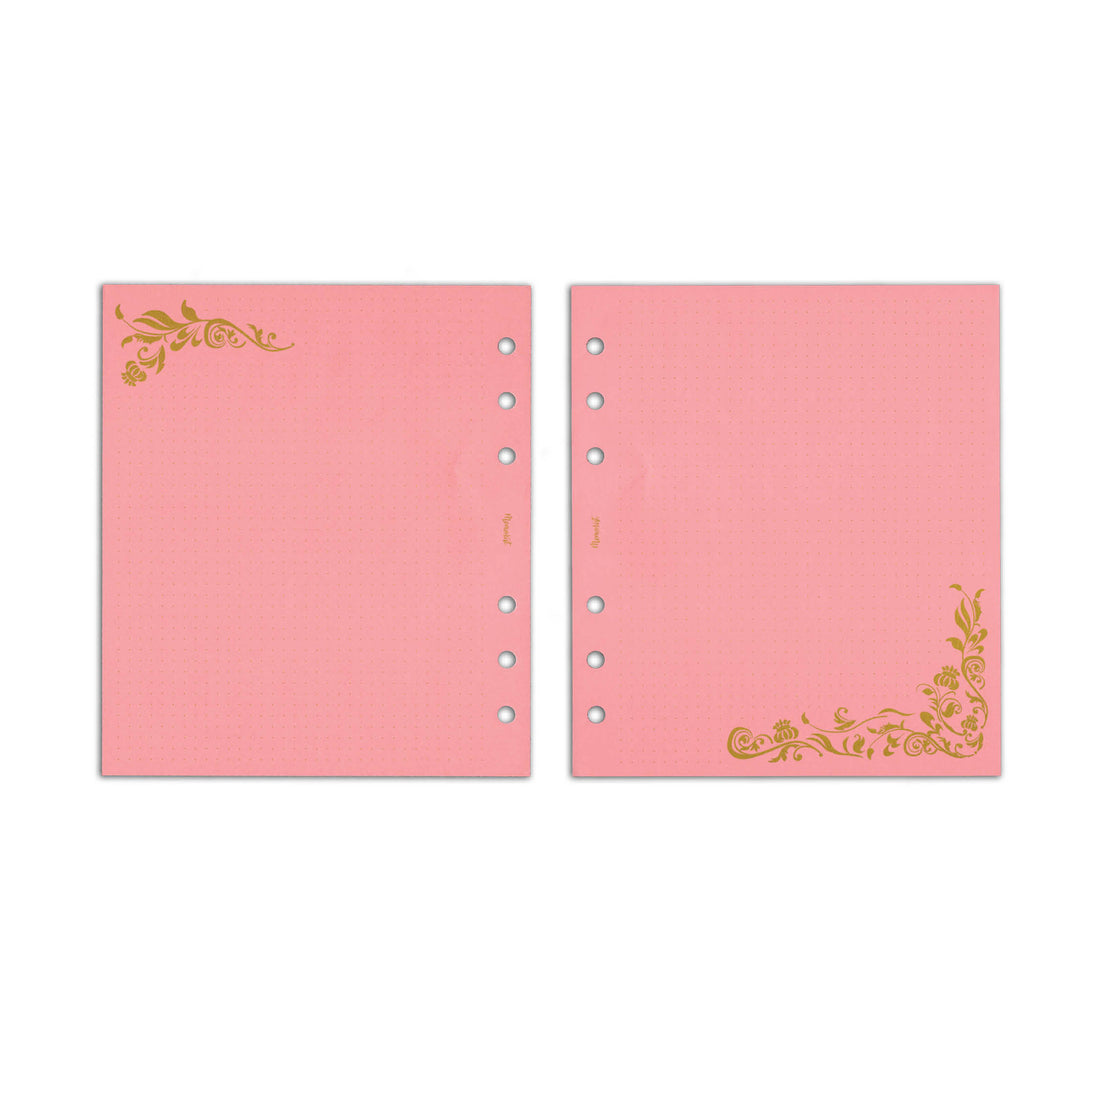 Dotted-Grid Color Refill【Peach Pink x Floral】(HBxWA5 Size)